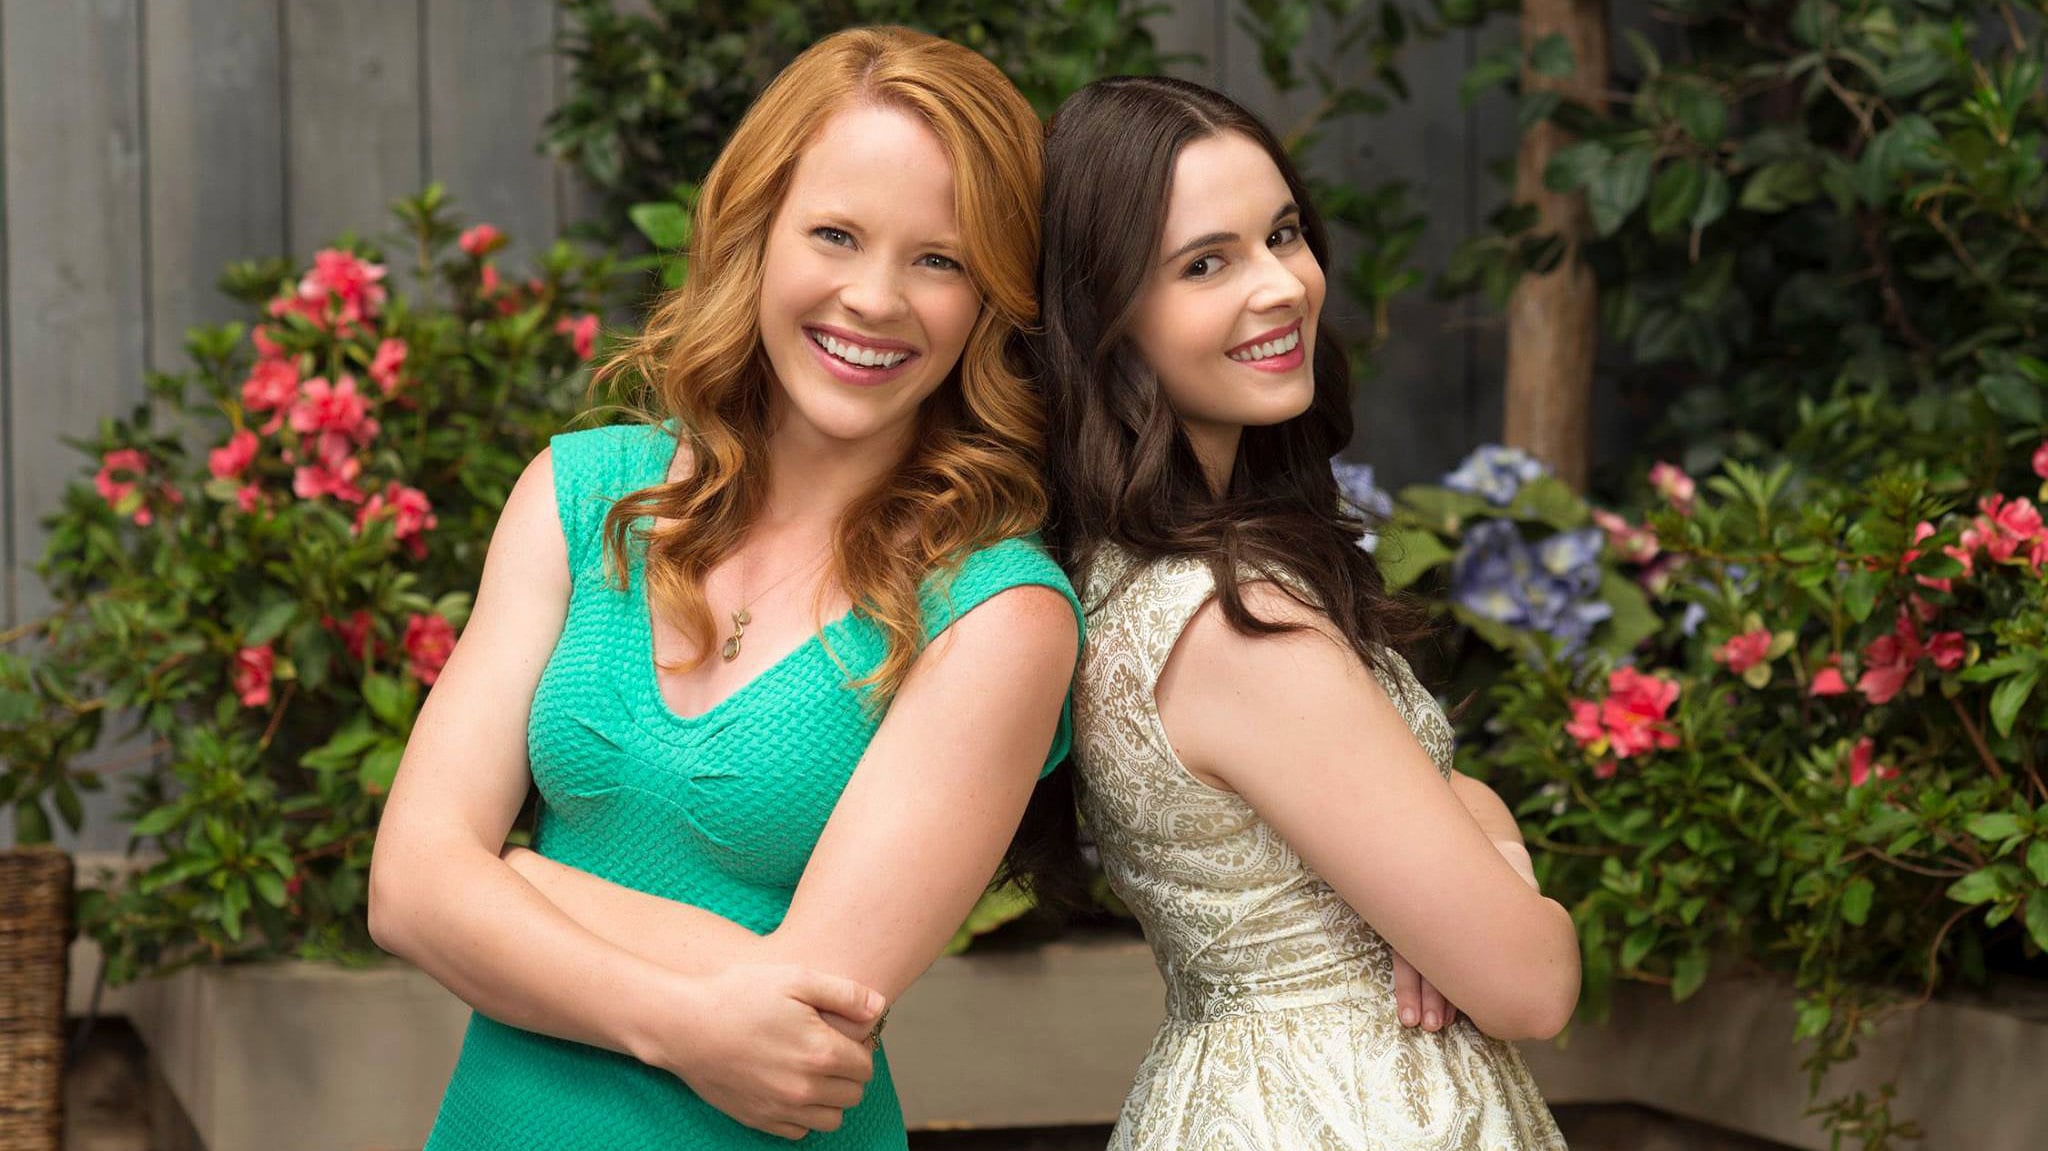 View, Download, Rate, and Comment on this Switched at Birth Image.